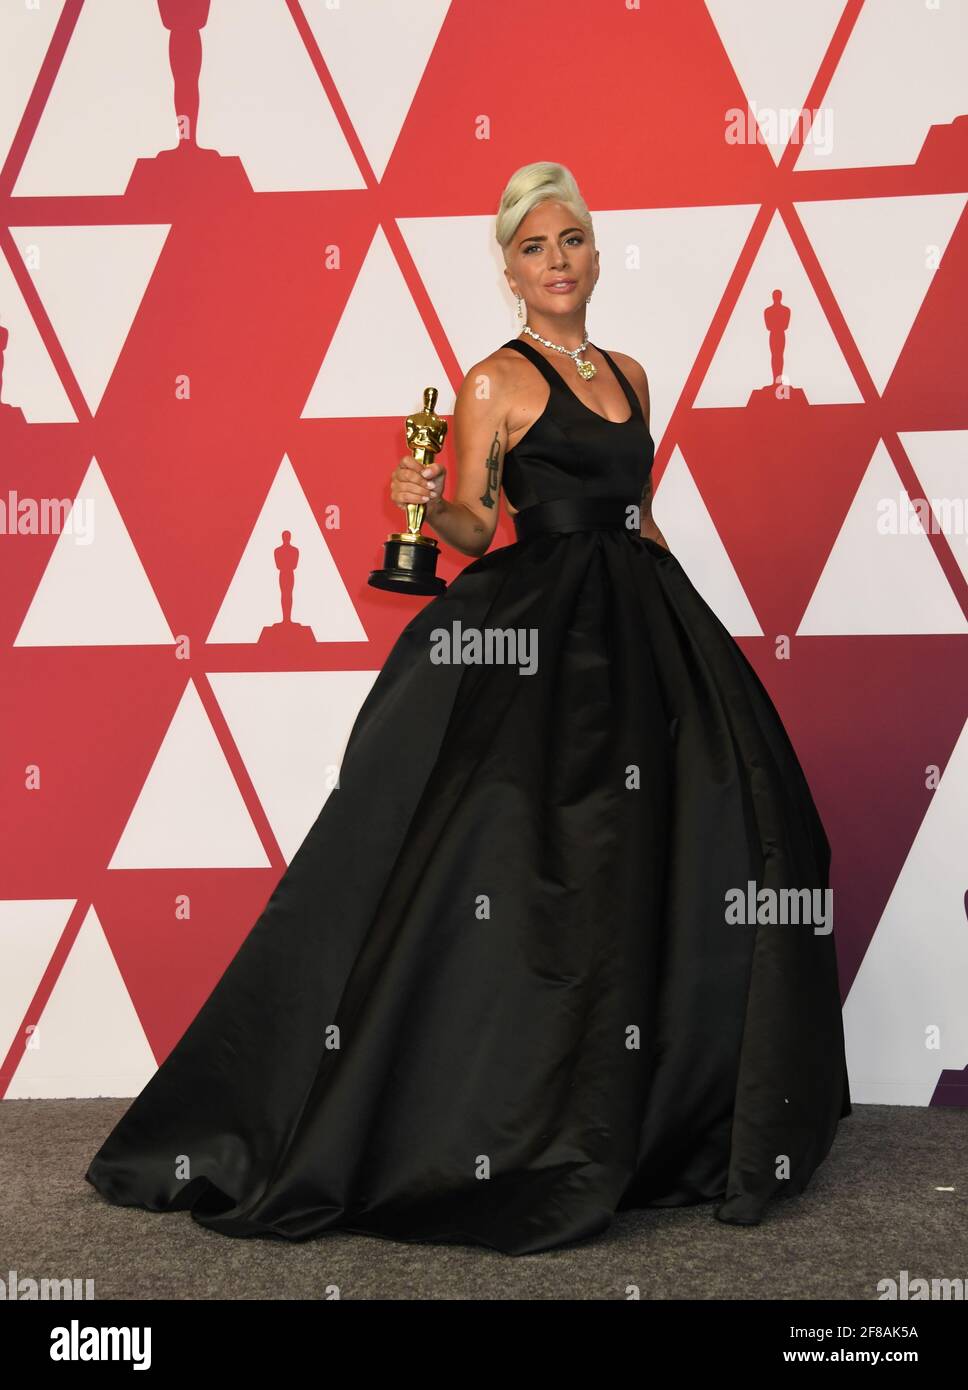 Oscar Winners Best Music Lady Gaga in the Press Room during the 91st Annual Academy Awards, Oscars, held at the Dolby Theater in Hollywood, California, Sunday, February 24, 2019 Photo by Jennifer Graylock-Graylock.com 917-519-7666 Stock Photo